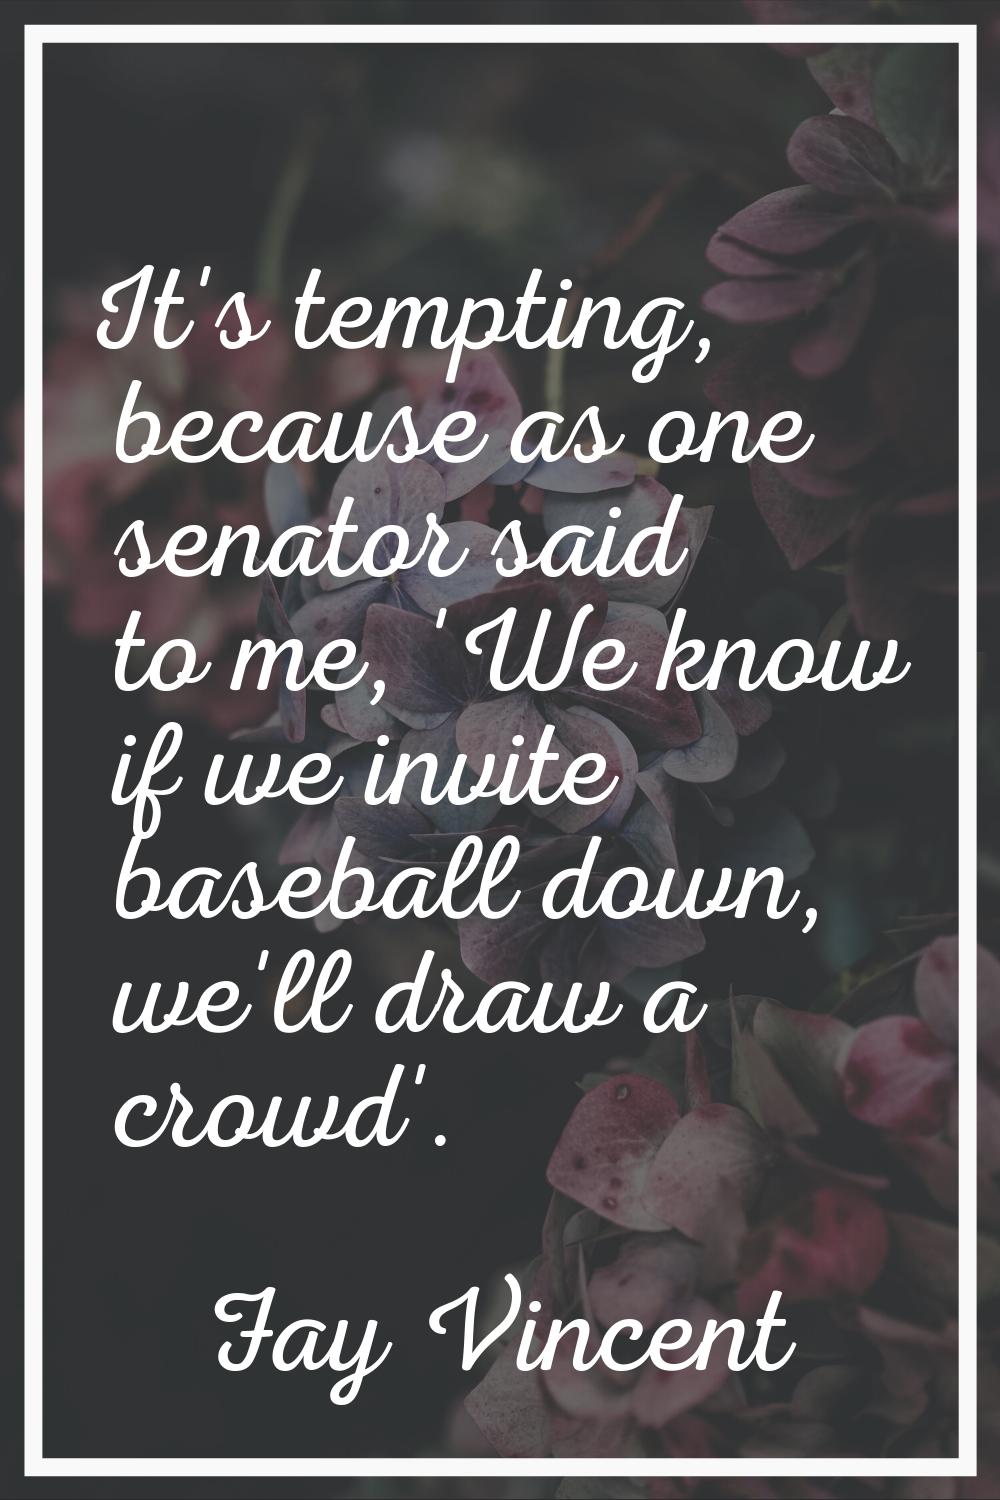 It's tempting, because as one senator said to me, 'We know if we invite baseball down, we'll draw a